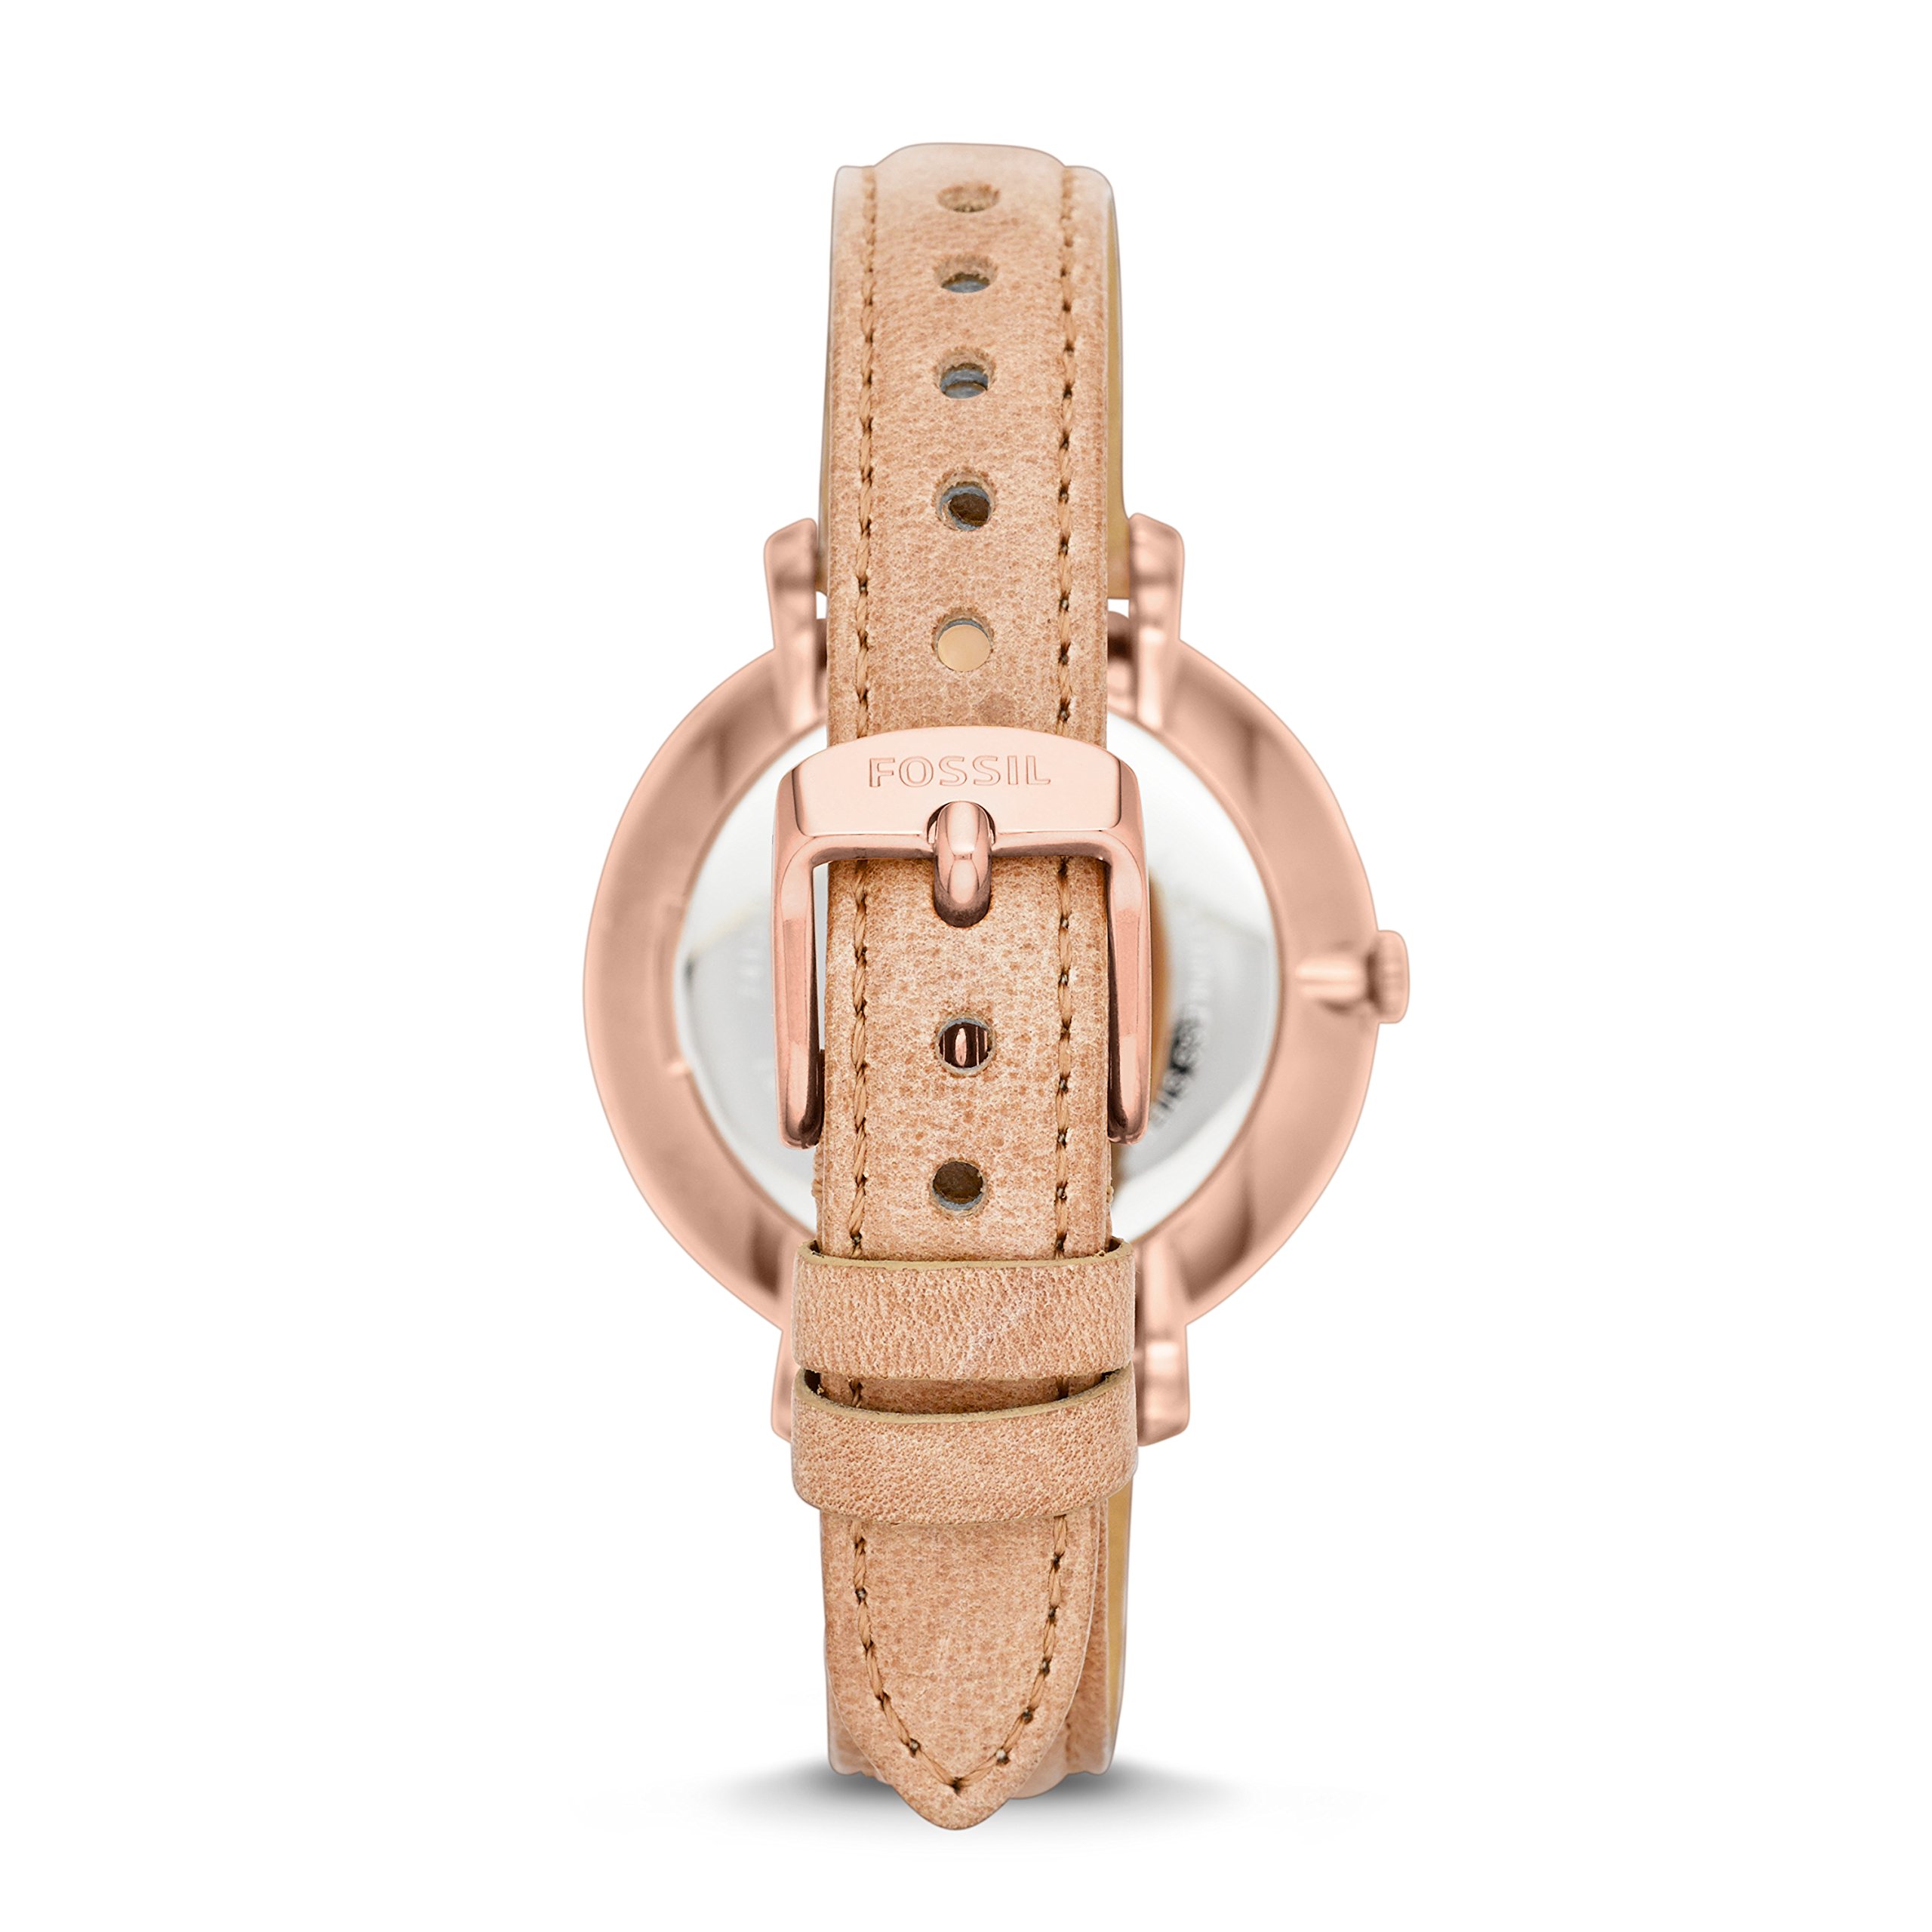 Fossil Women's 36mm Polished Rose Goldtone Jacqueline Watch with Sand Leather Strap